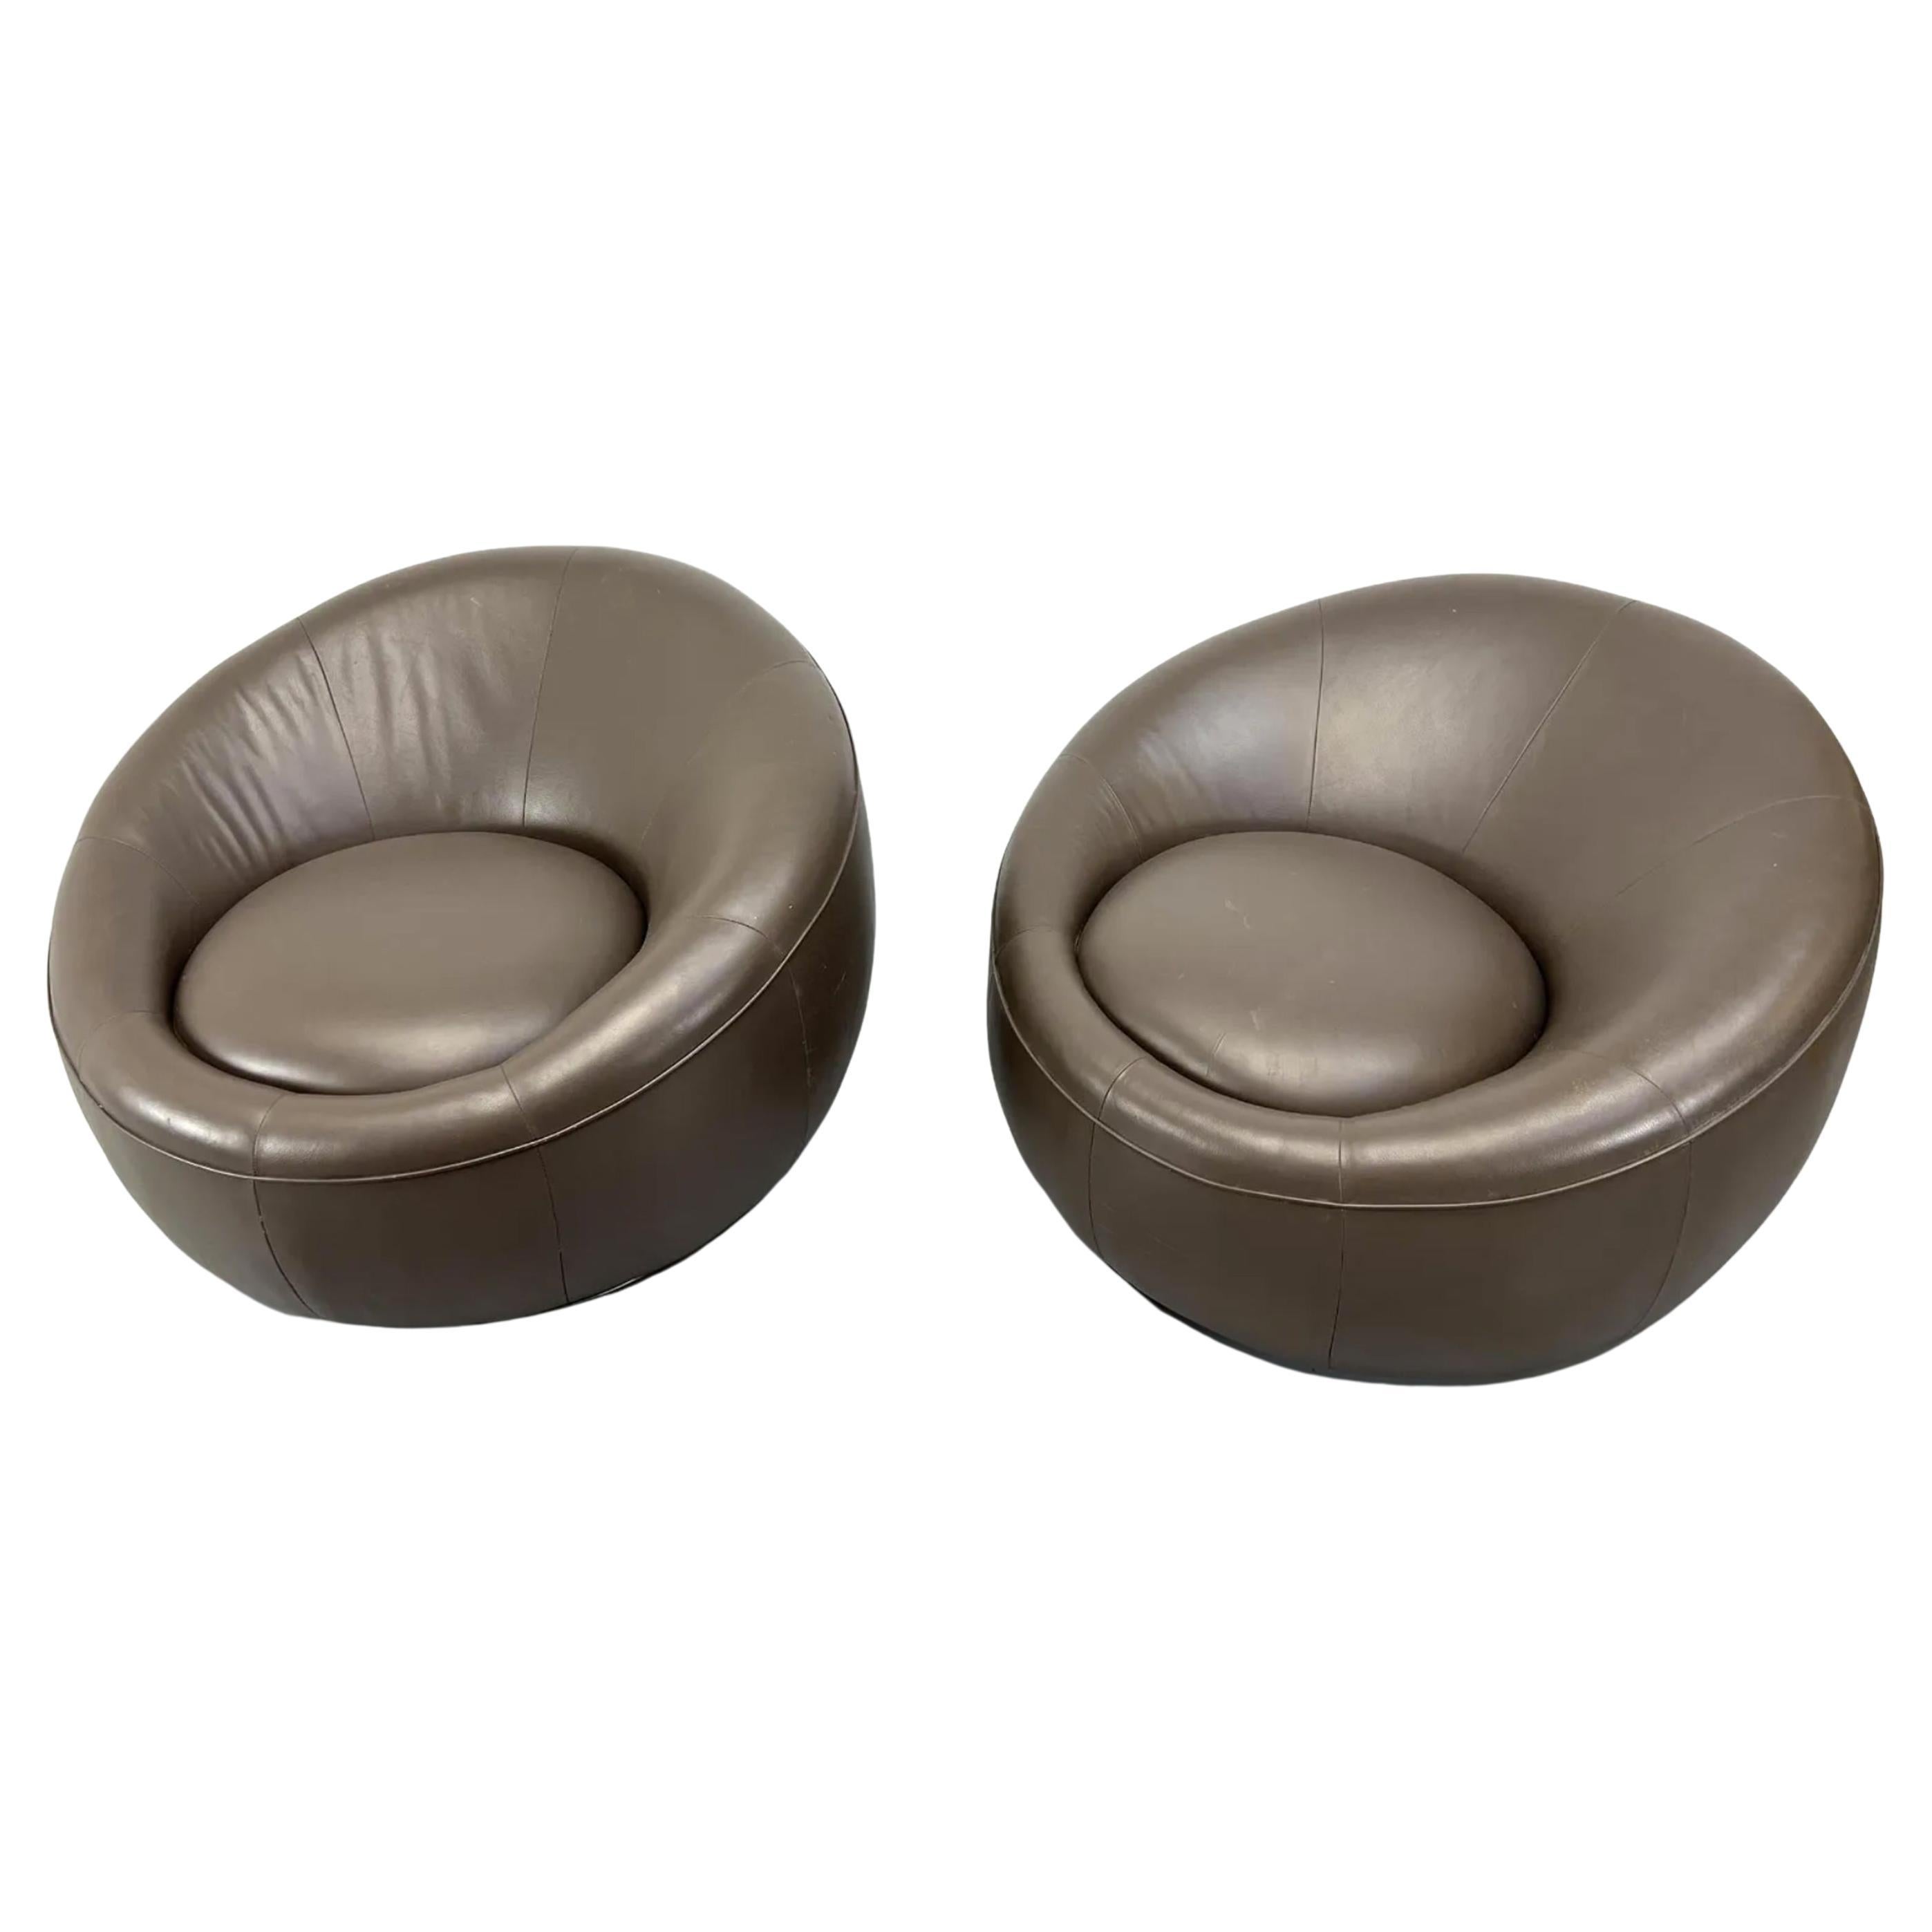 Pair of Modern Orb Pod Biomorphic Brown Leather lounge chairs on Swivel Steel round bases Leather is in good pre owned condition. Both chairs Swivel smoothly. Very cool pair of round Lounge chairs. Ready for use, very heavy and sturdy. Located in